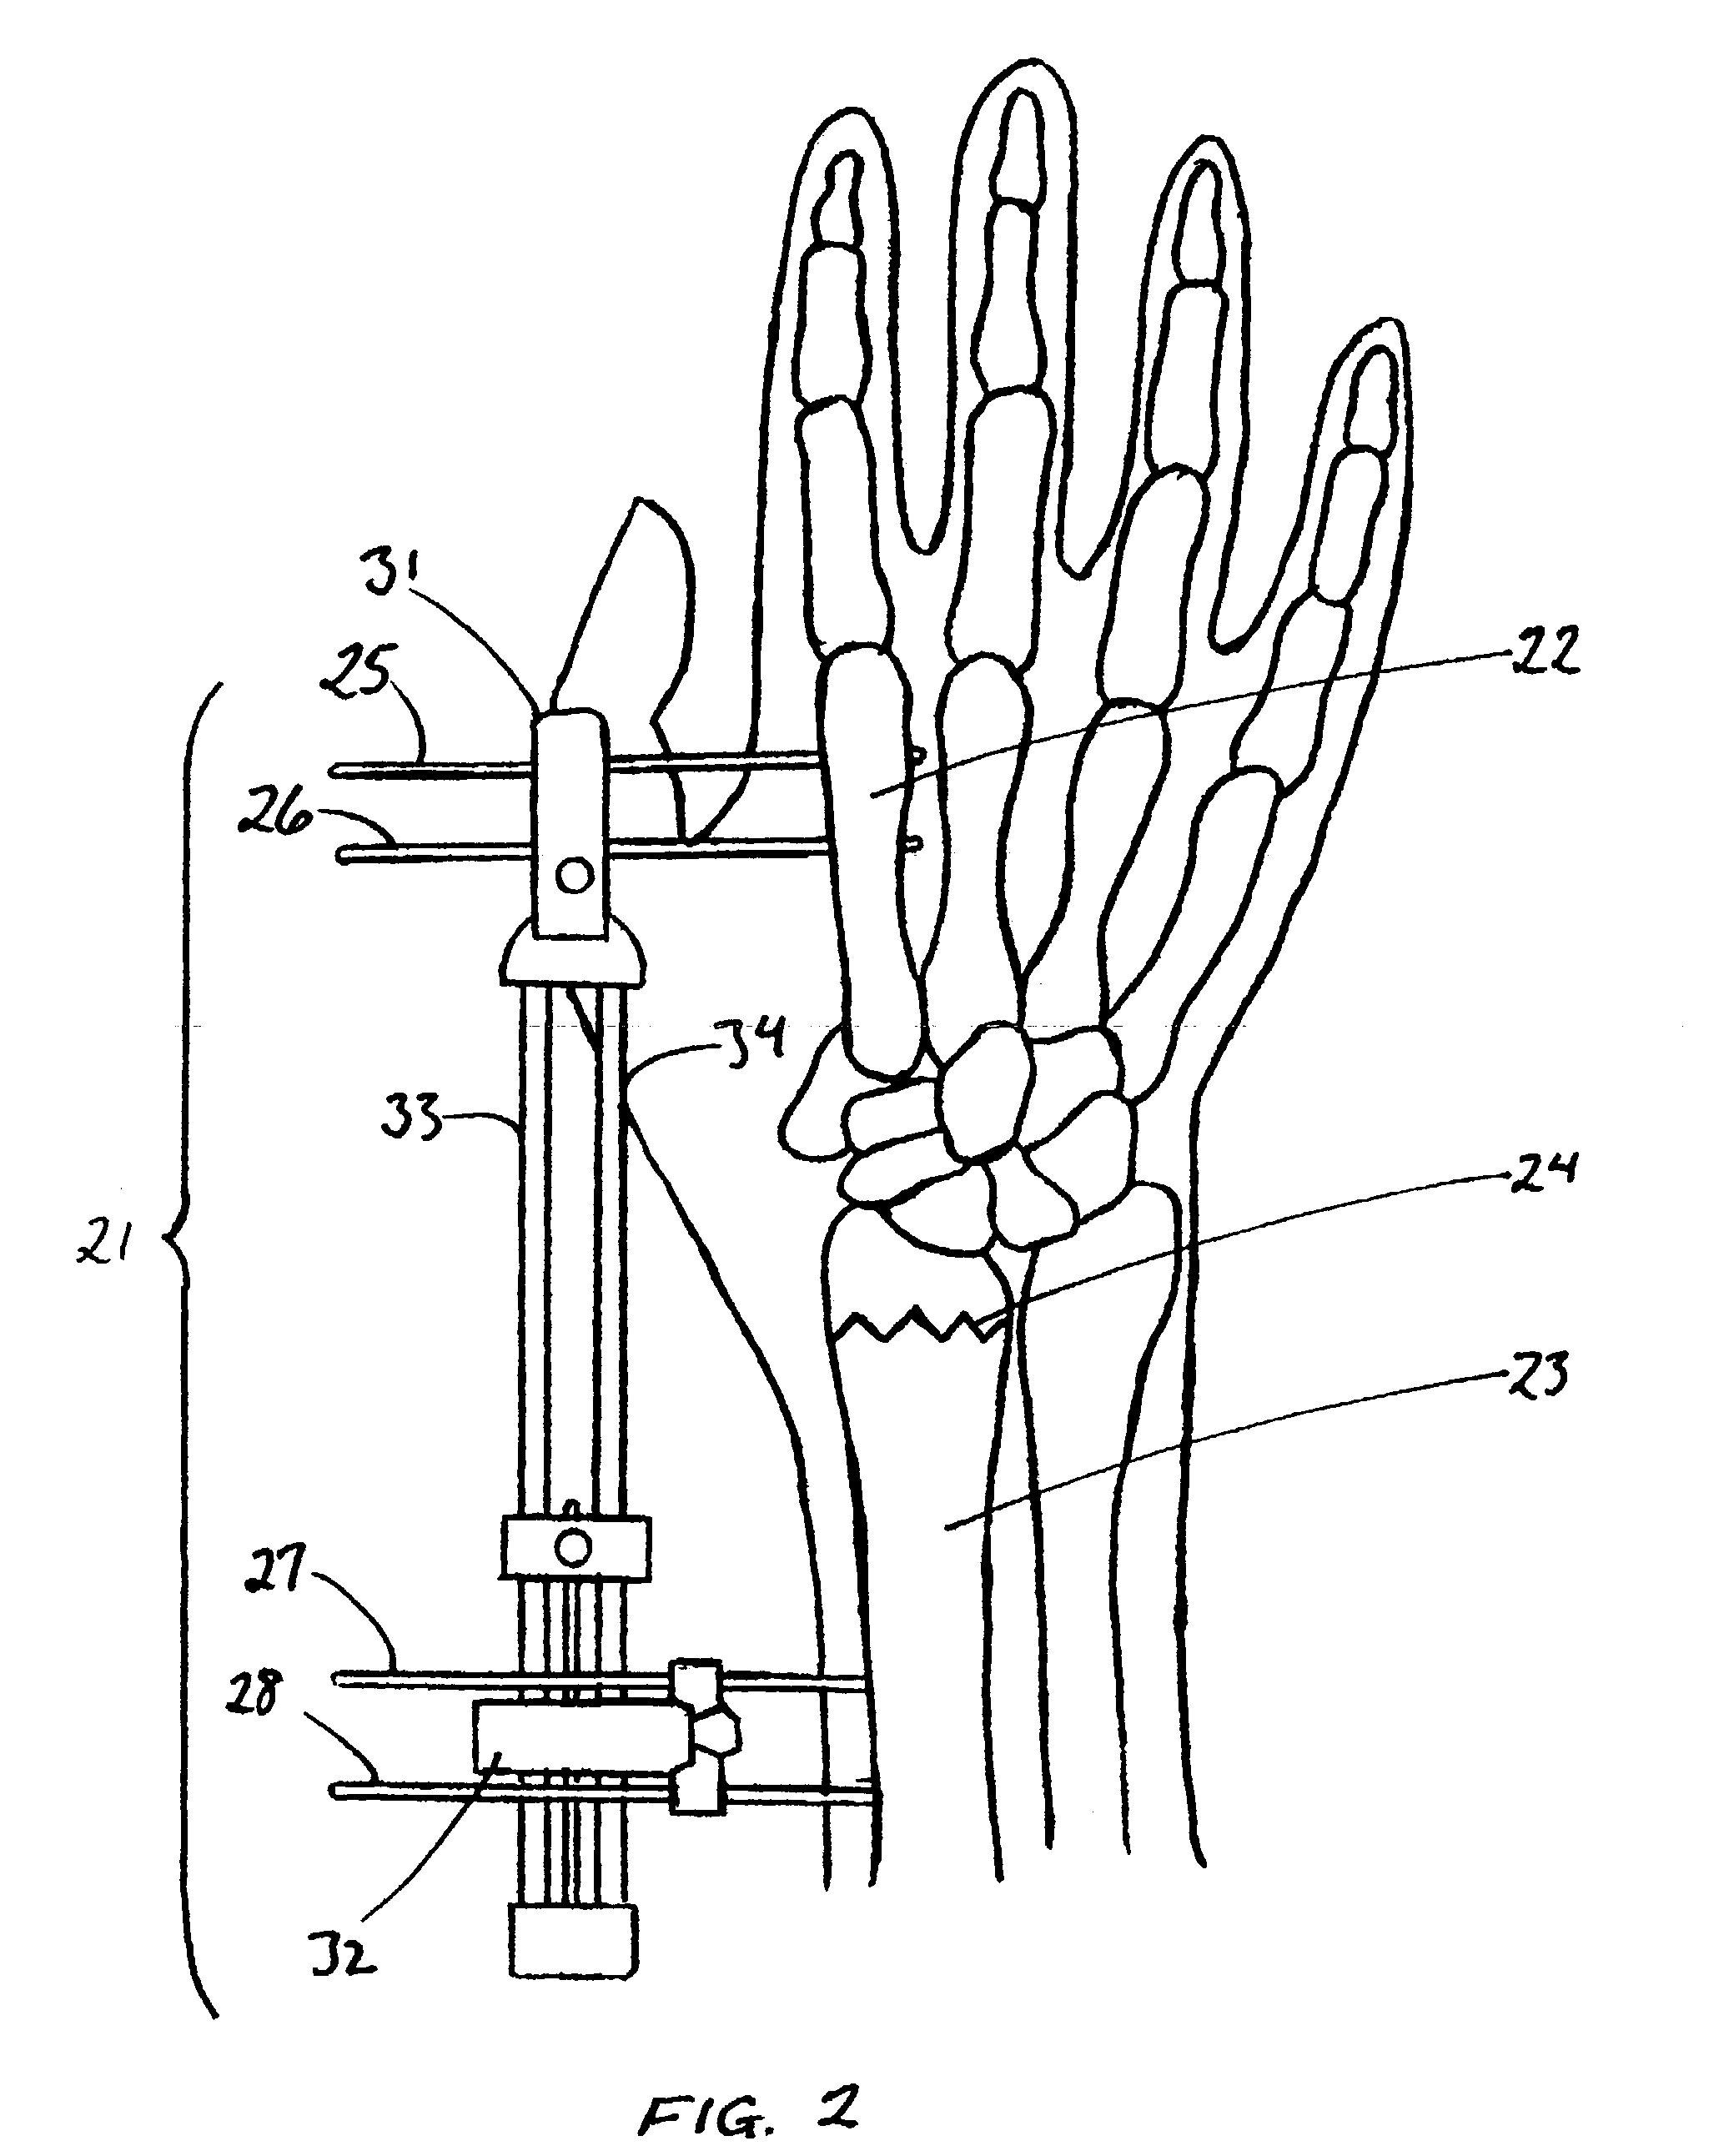 External fixator for colles' fracture